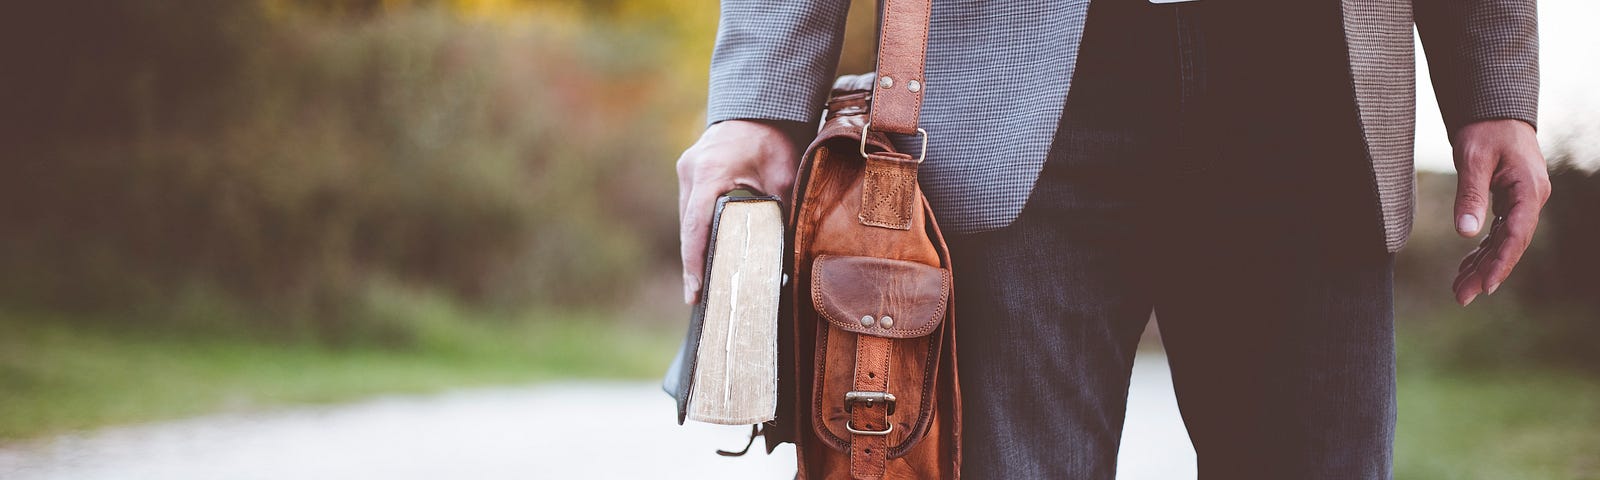 Man walking a path with a brown leather satchel and a Bible